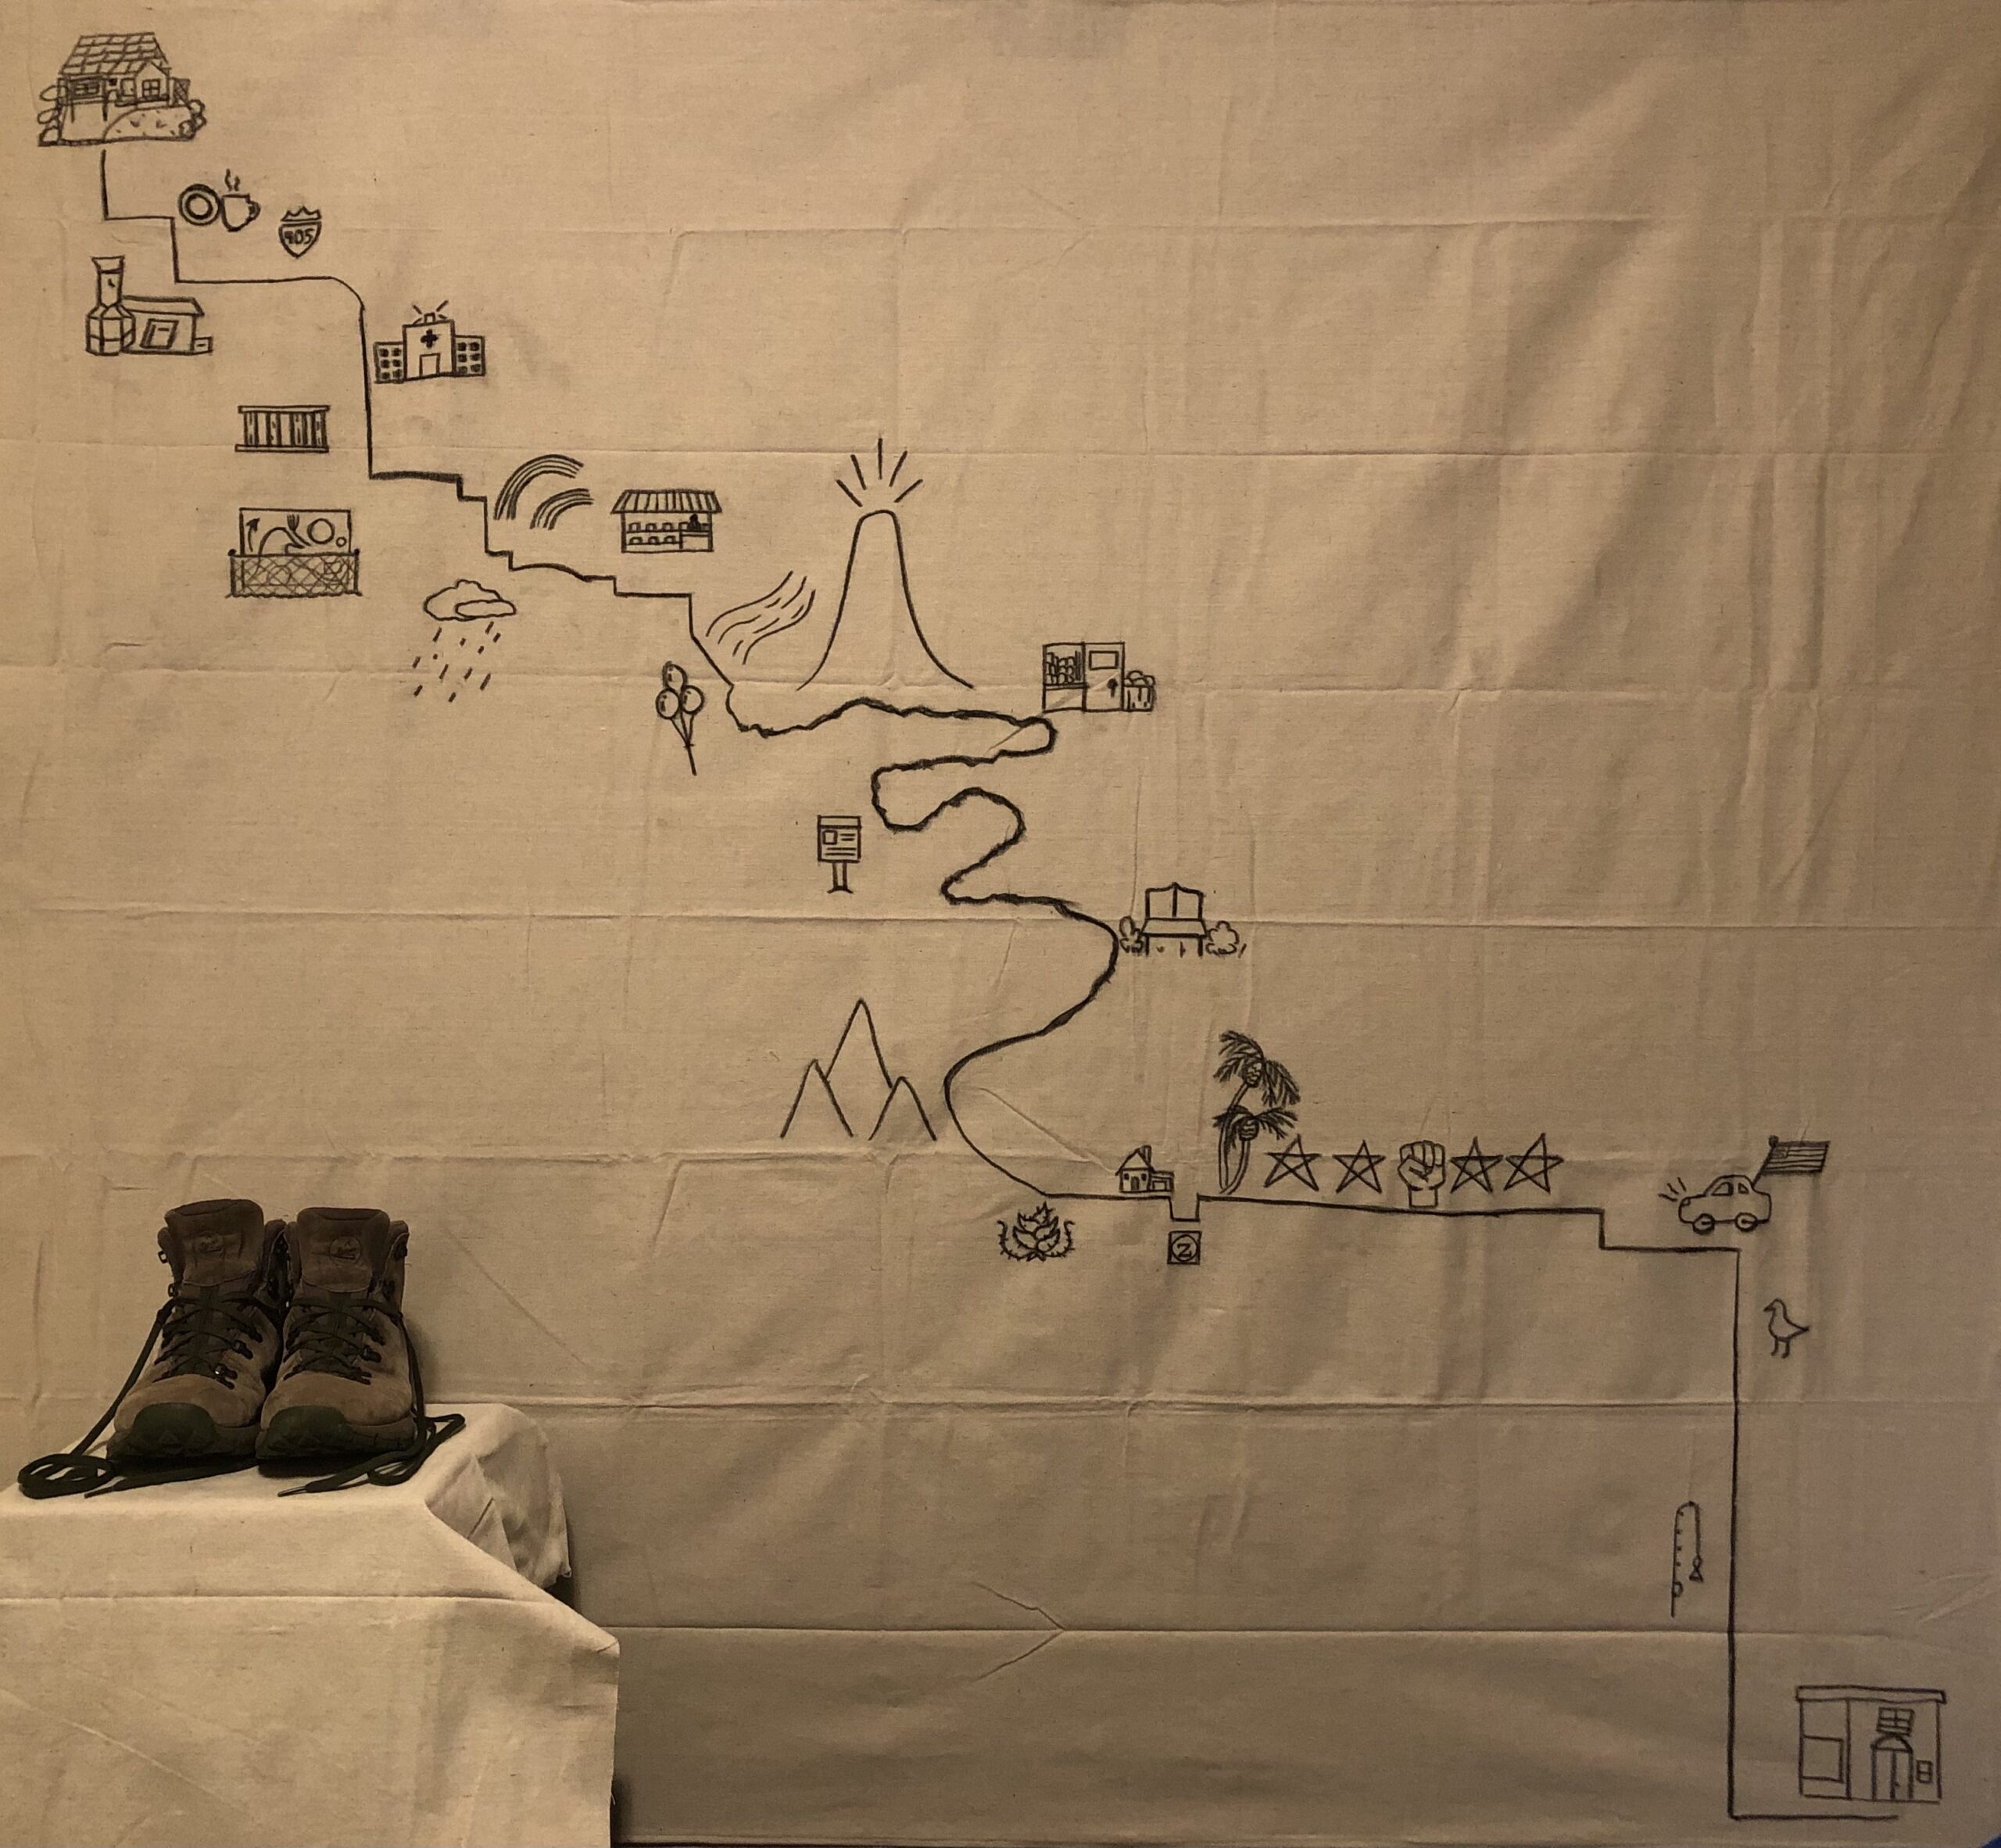 A large map hung on a wall with imagery and accompanied by a pair of hiking boots.